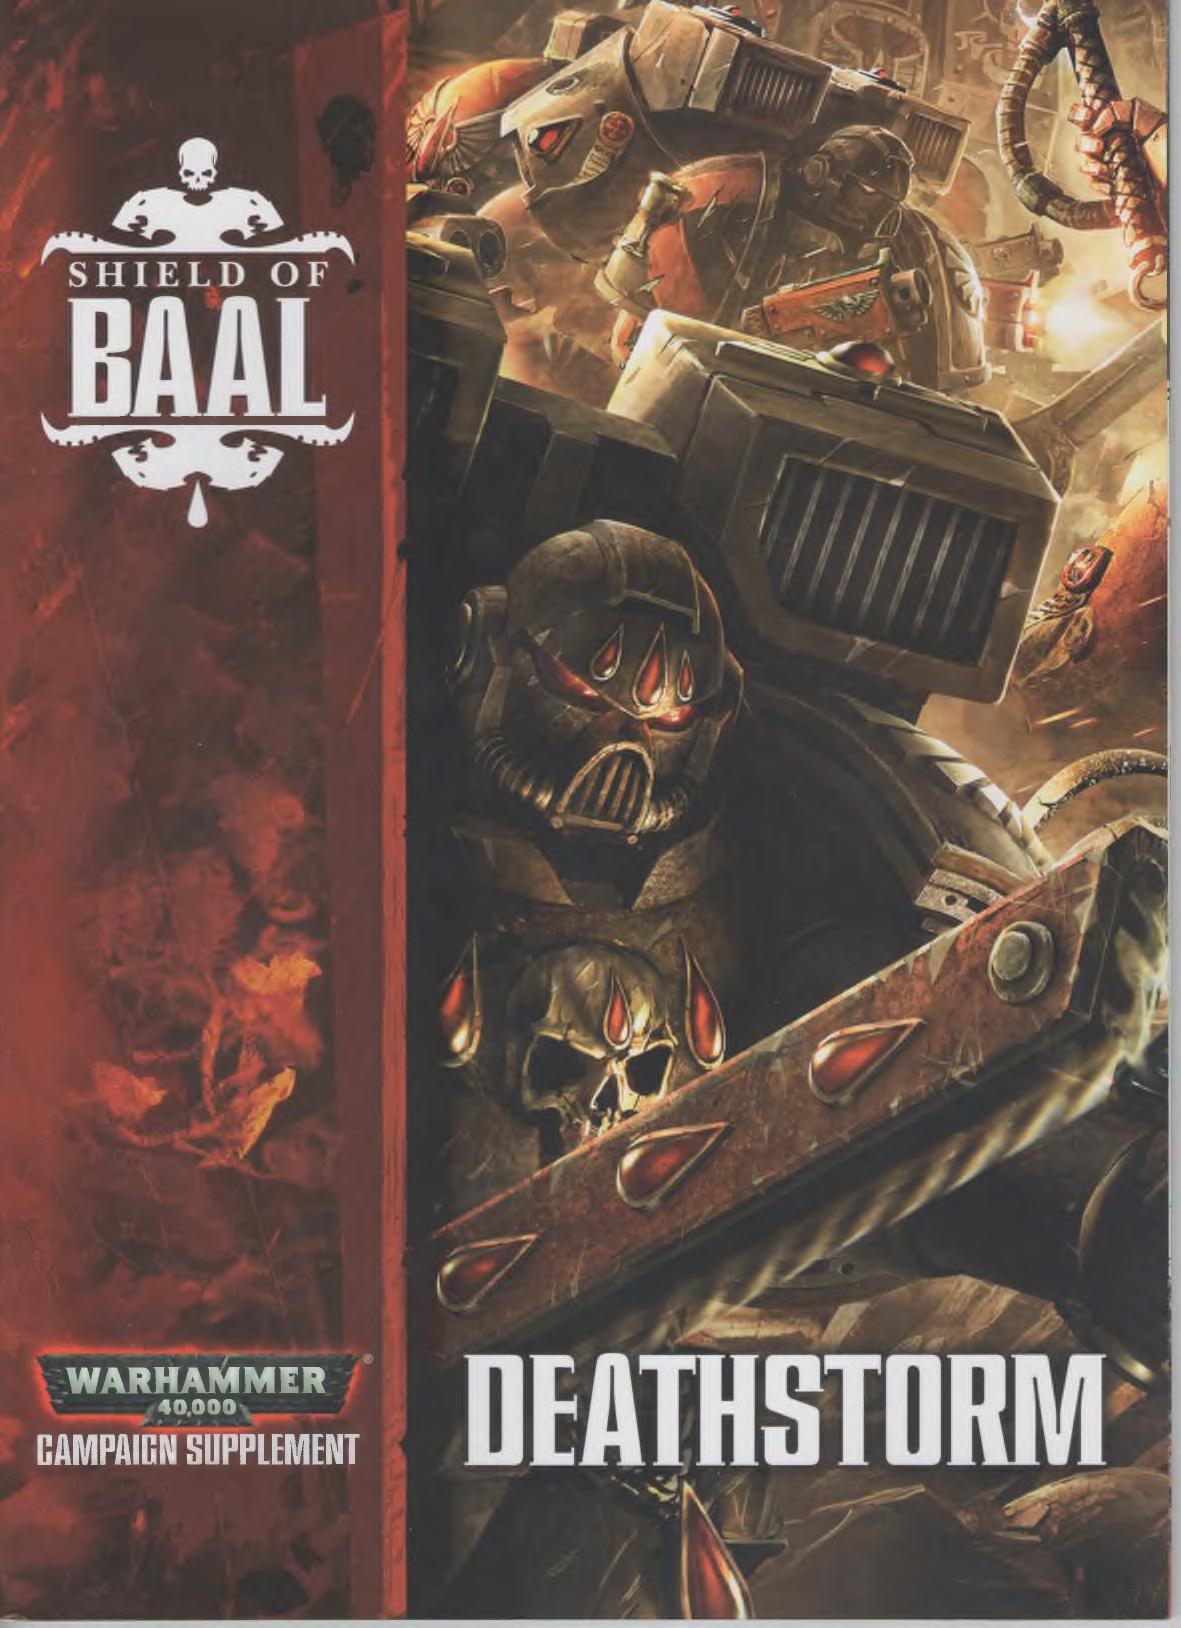 Warhammer 40k - Expansion Book - Shield of Baal by Deathstorm (7E)